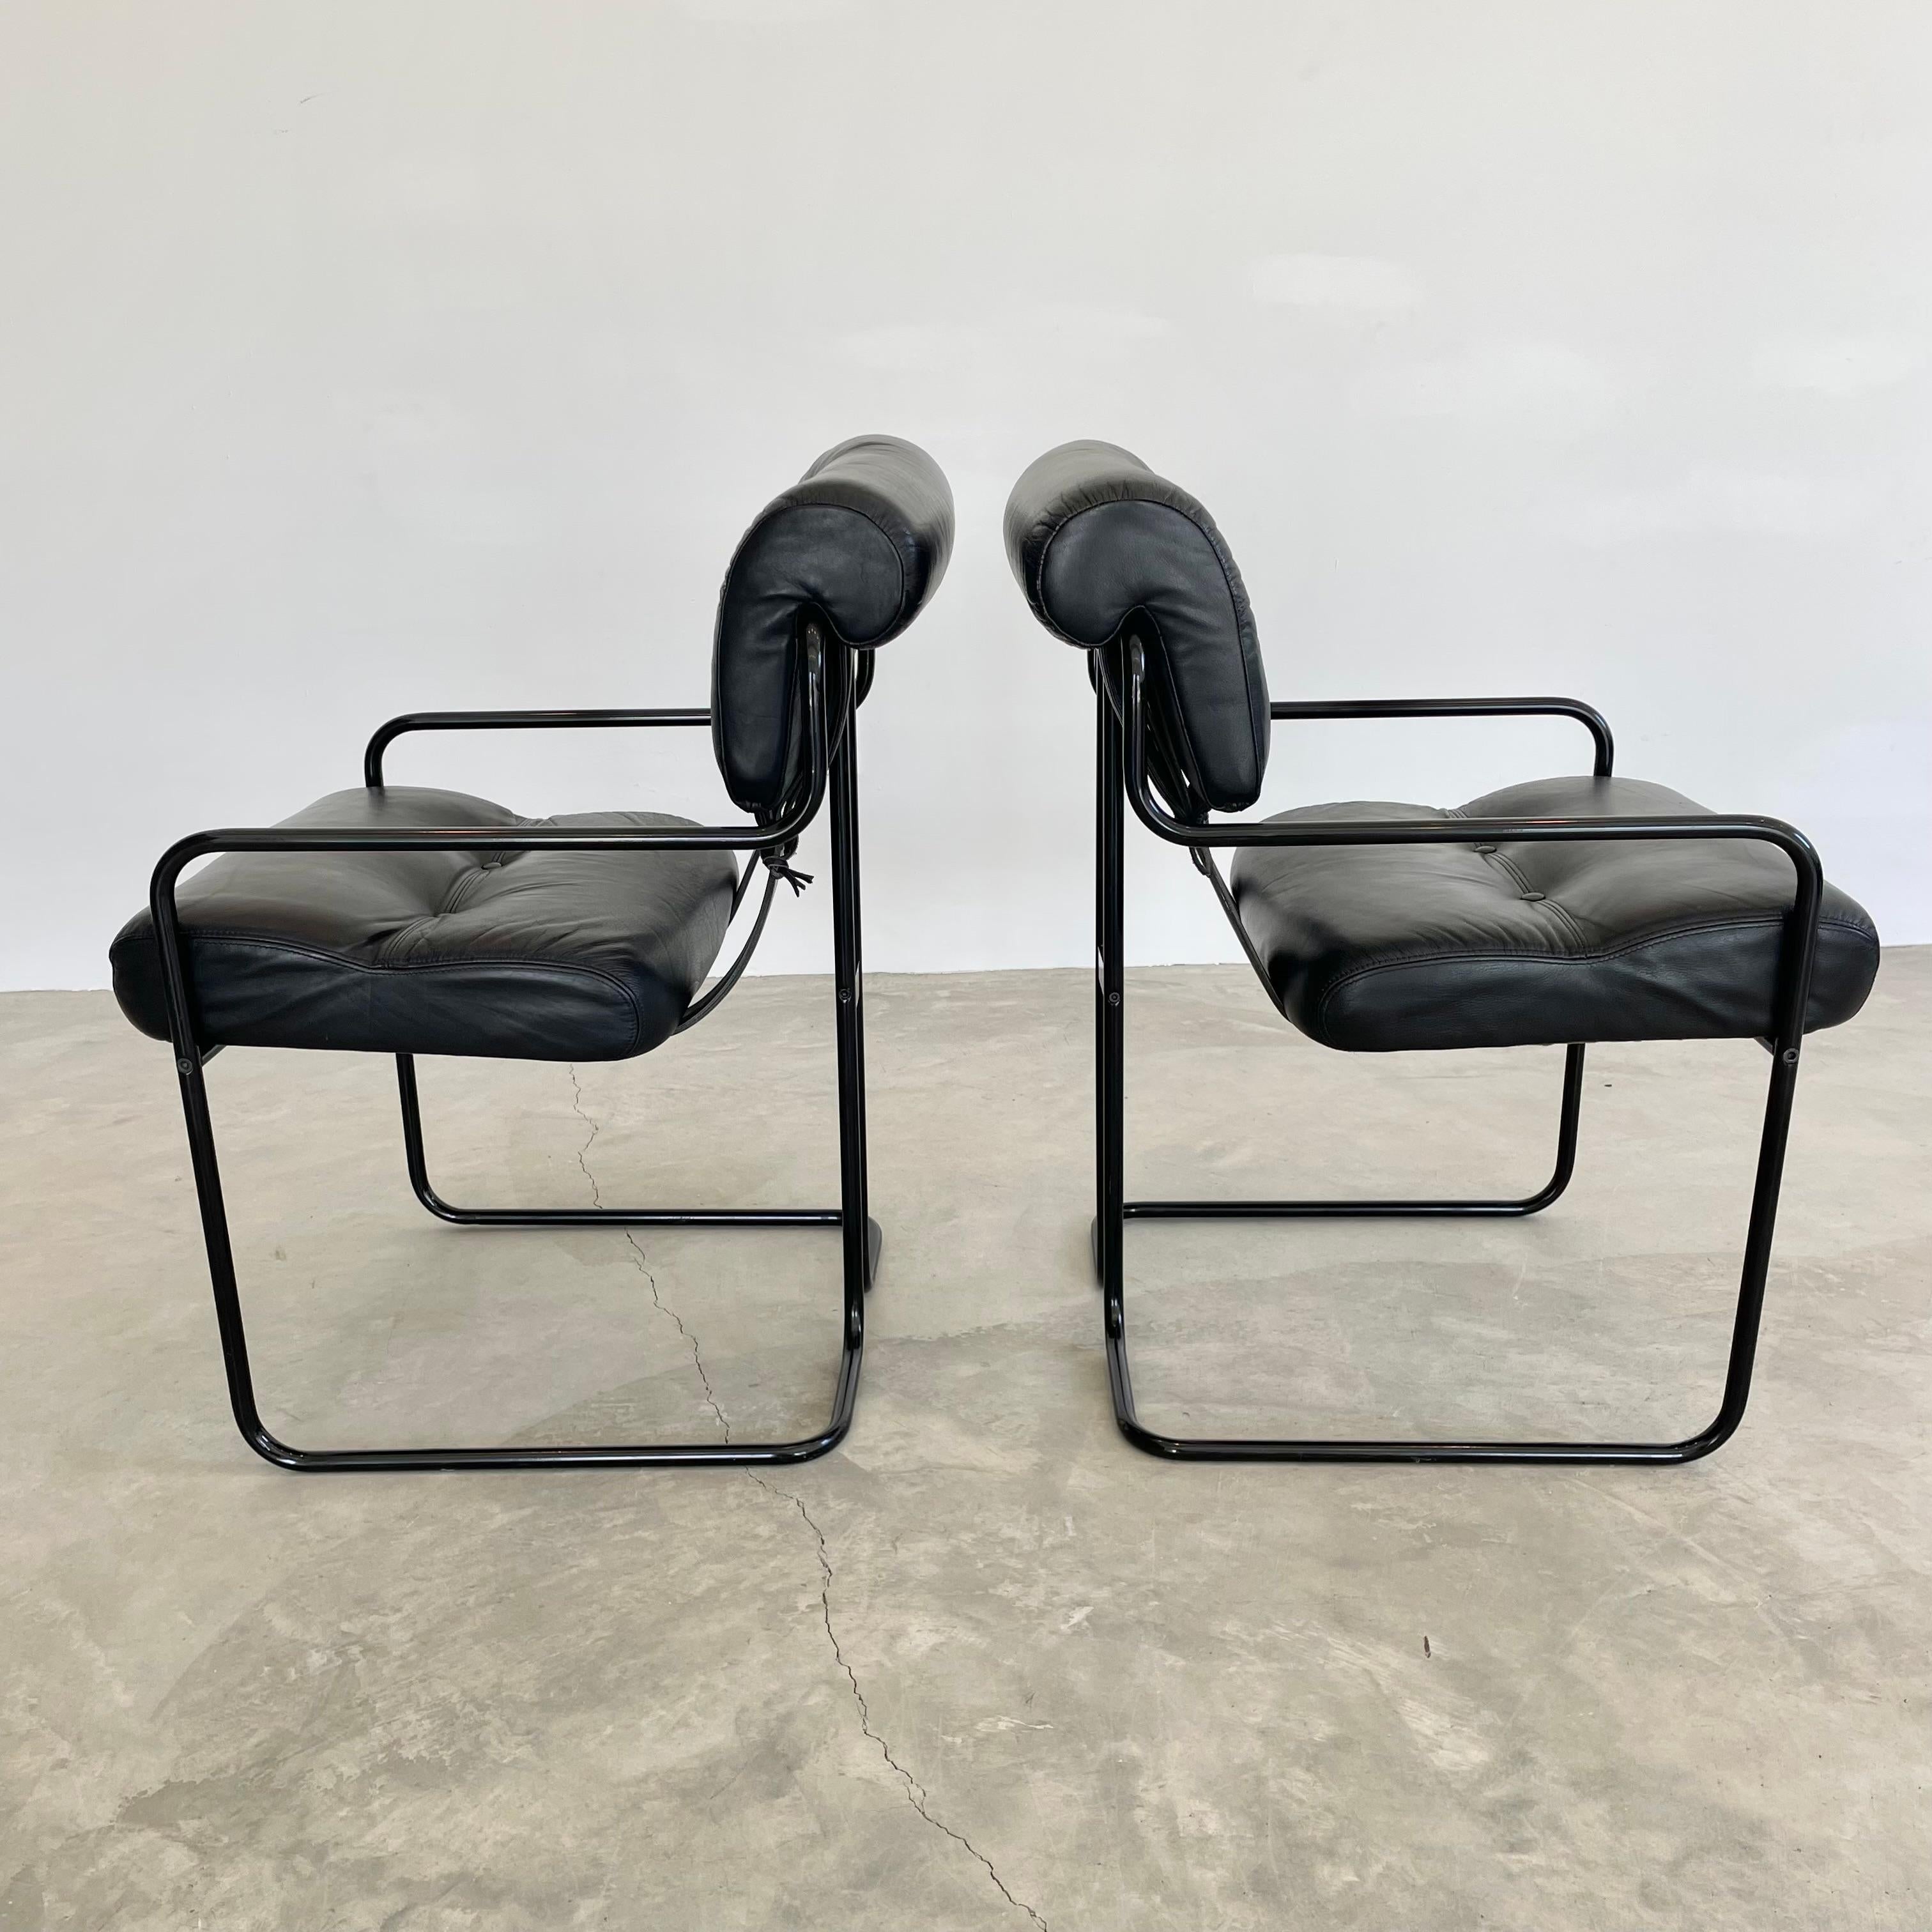 Guido Faleschini Tucroma Dining Chairs in Black Leather for Mariani, 1980s Italy For Sale 9